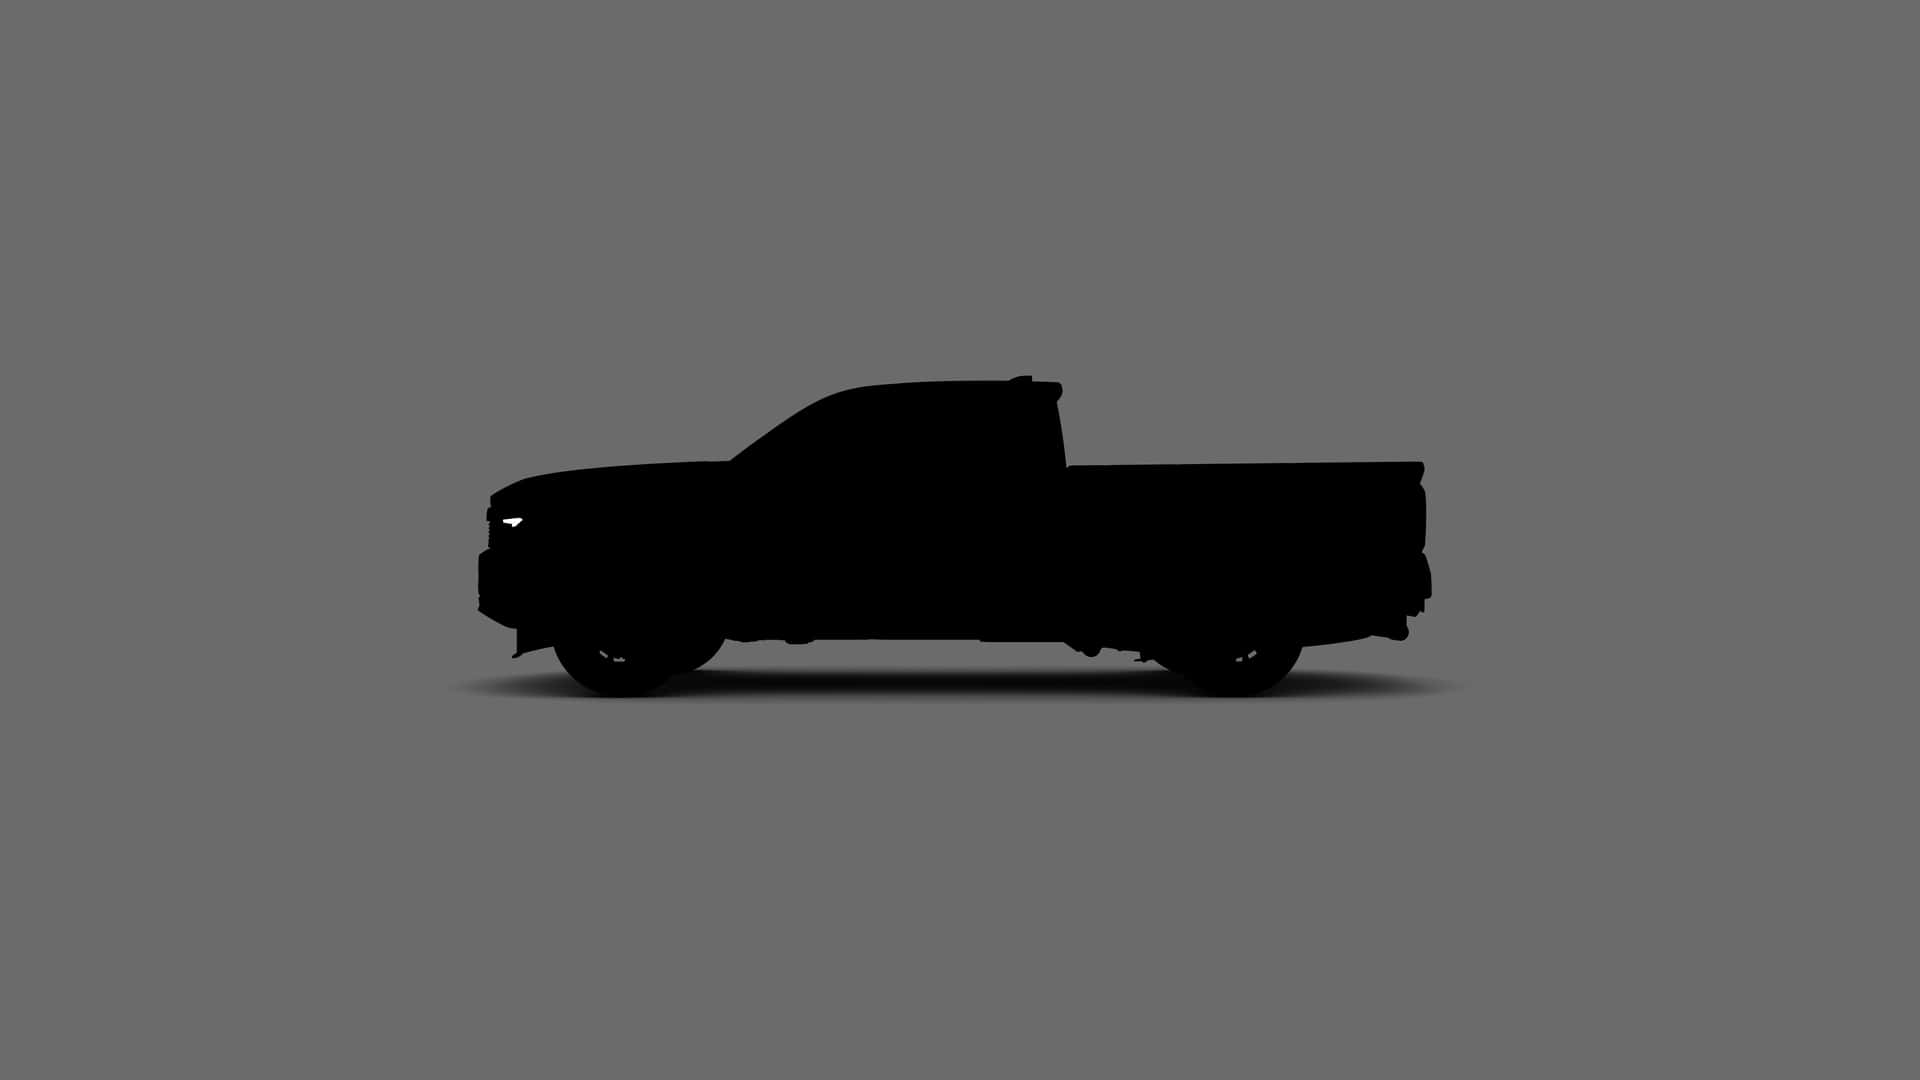 2024 Tacoma Official: 2024 Toyota Tacoma Debuts May 19 + New Silhouette Teasers Confirm Different Cab & Wheelbase Configurations 2024-toyota-tacoma-new-teaser-image